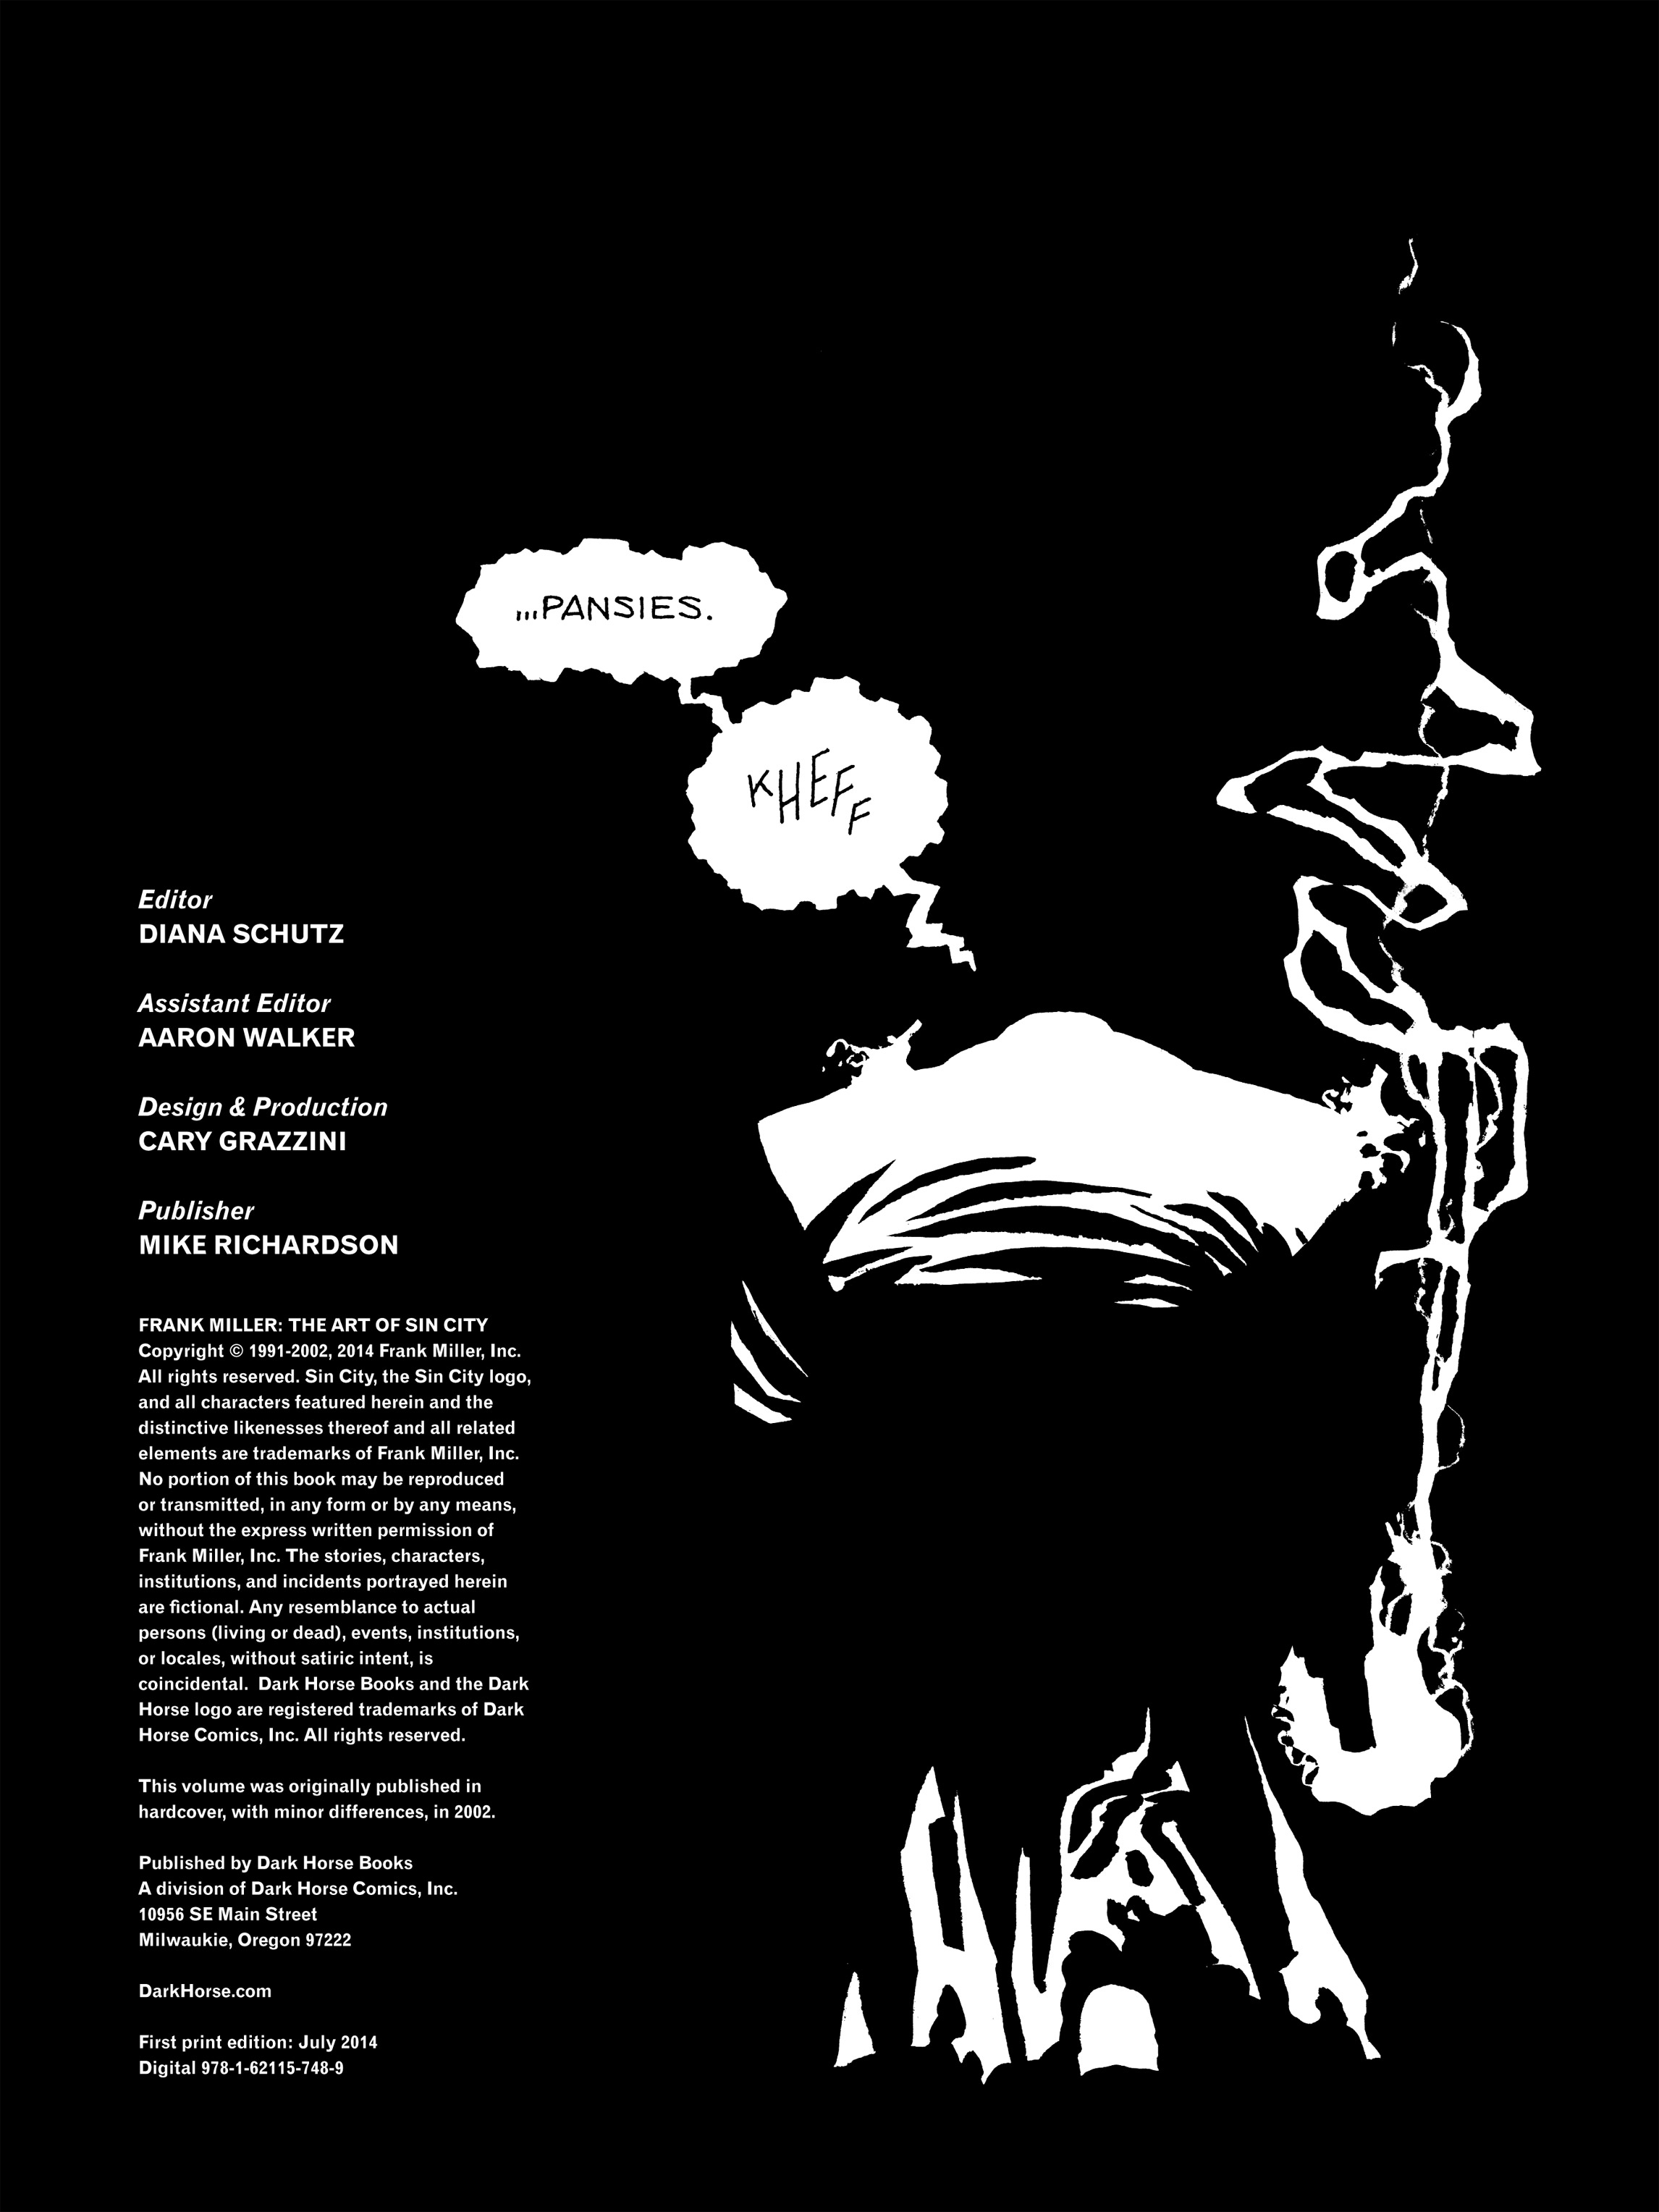 Read online Frank Miller: The Art of Sin City comic -  Issue # TPB - 5